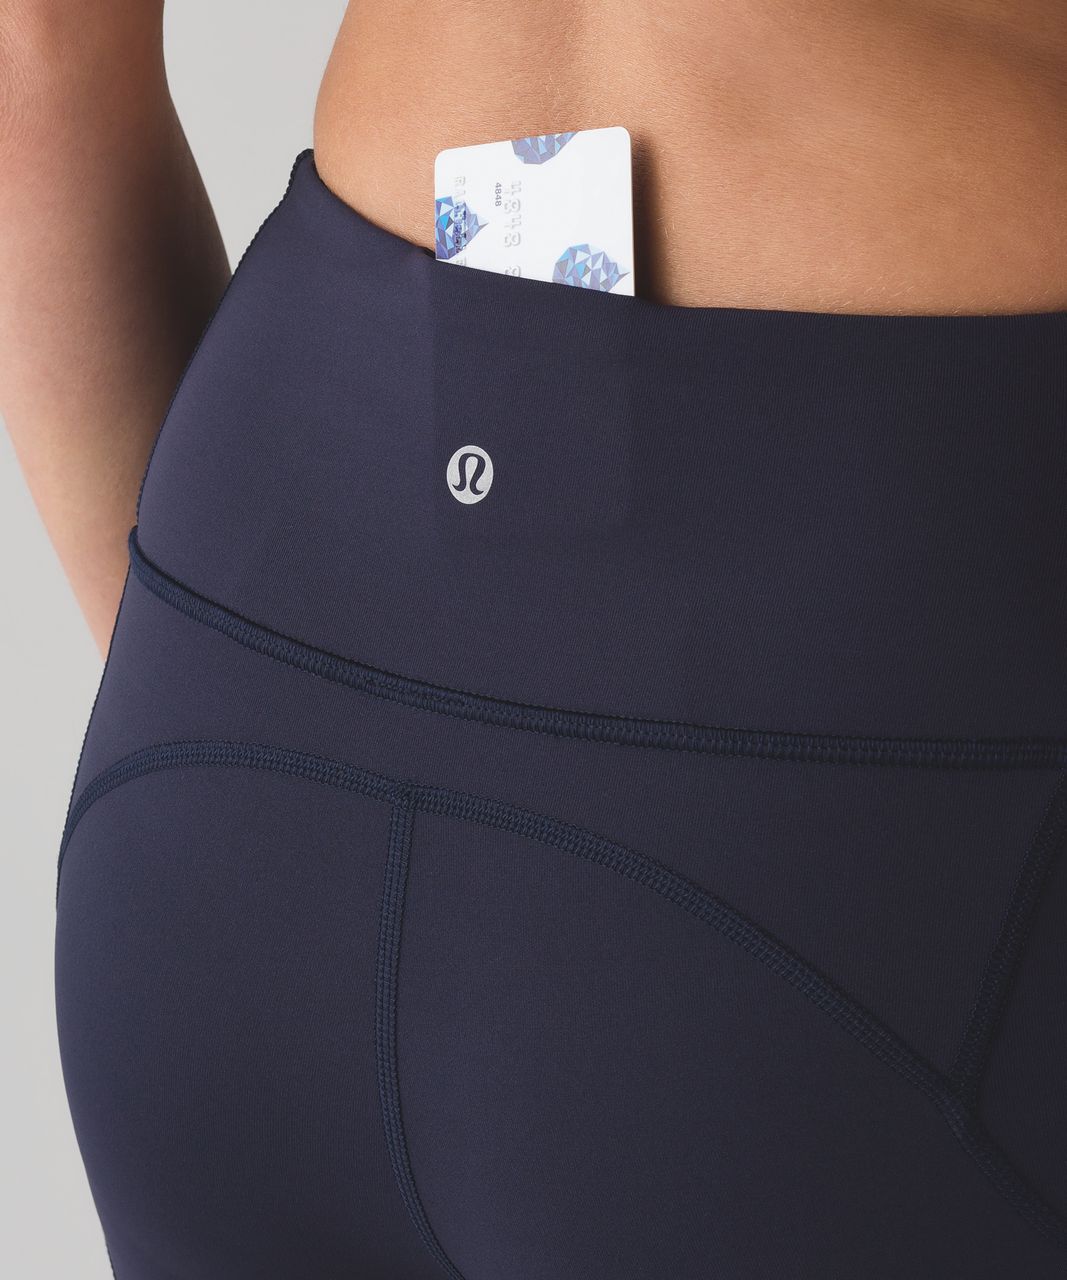 Lululemon All The Right Places Pant II *28 - Midnight Navy - lulu